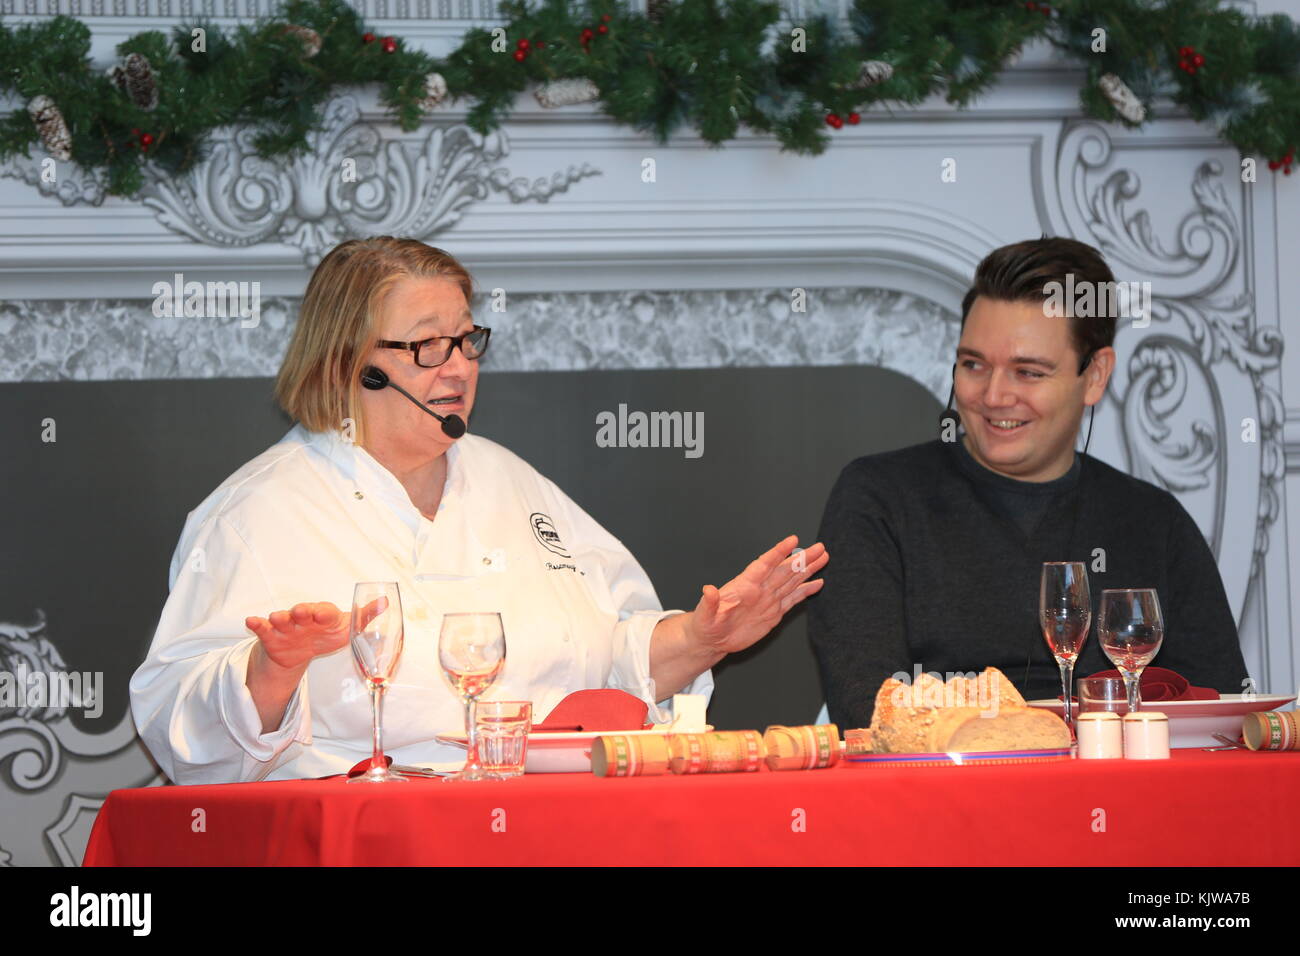 Final day of The Ideal Home Show at Christmas 2017, featuring professional chefs Theo Randall and Rosemary Shrager Stock Photo